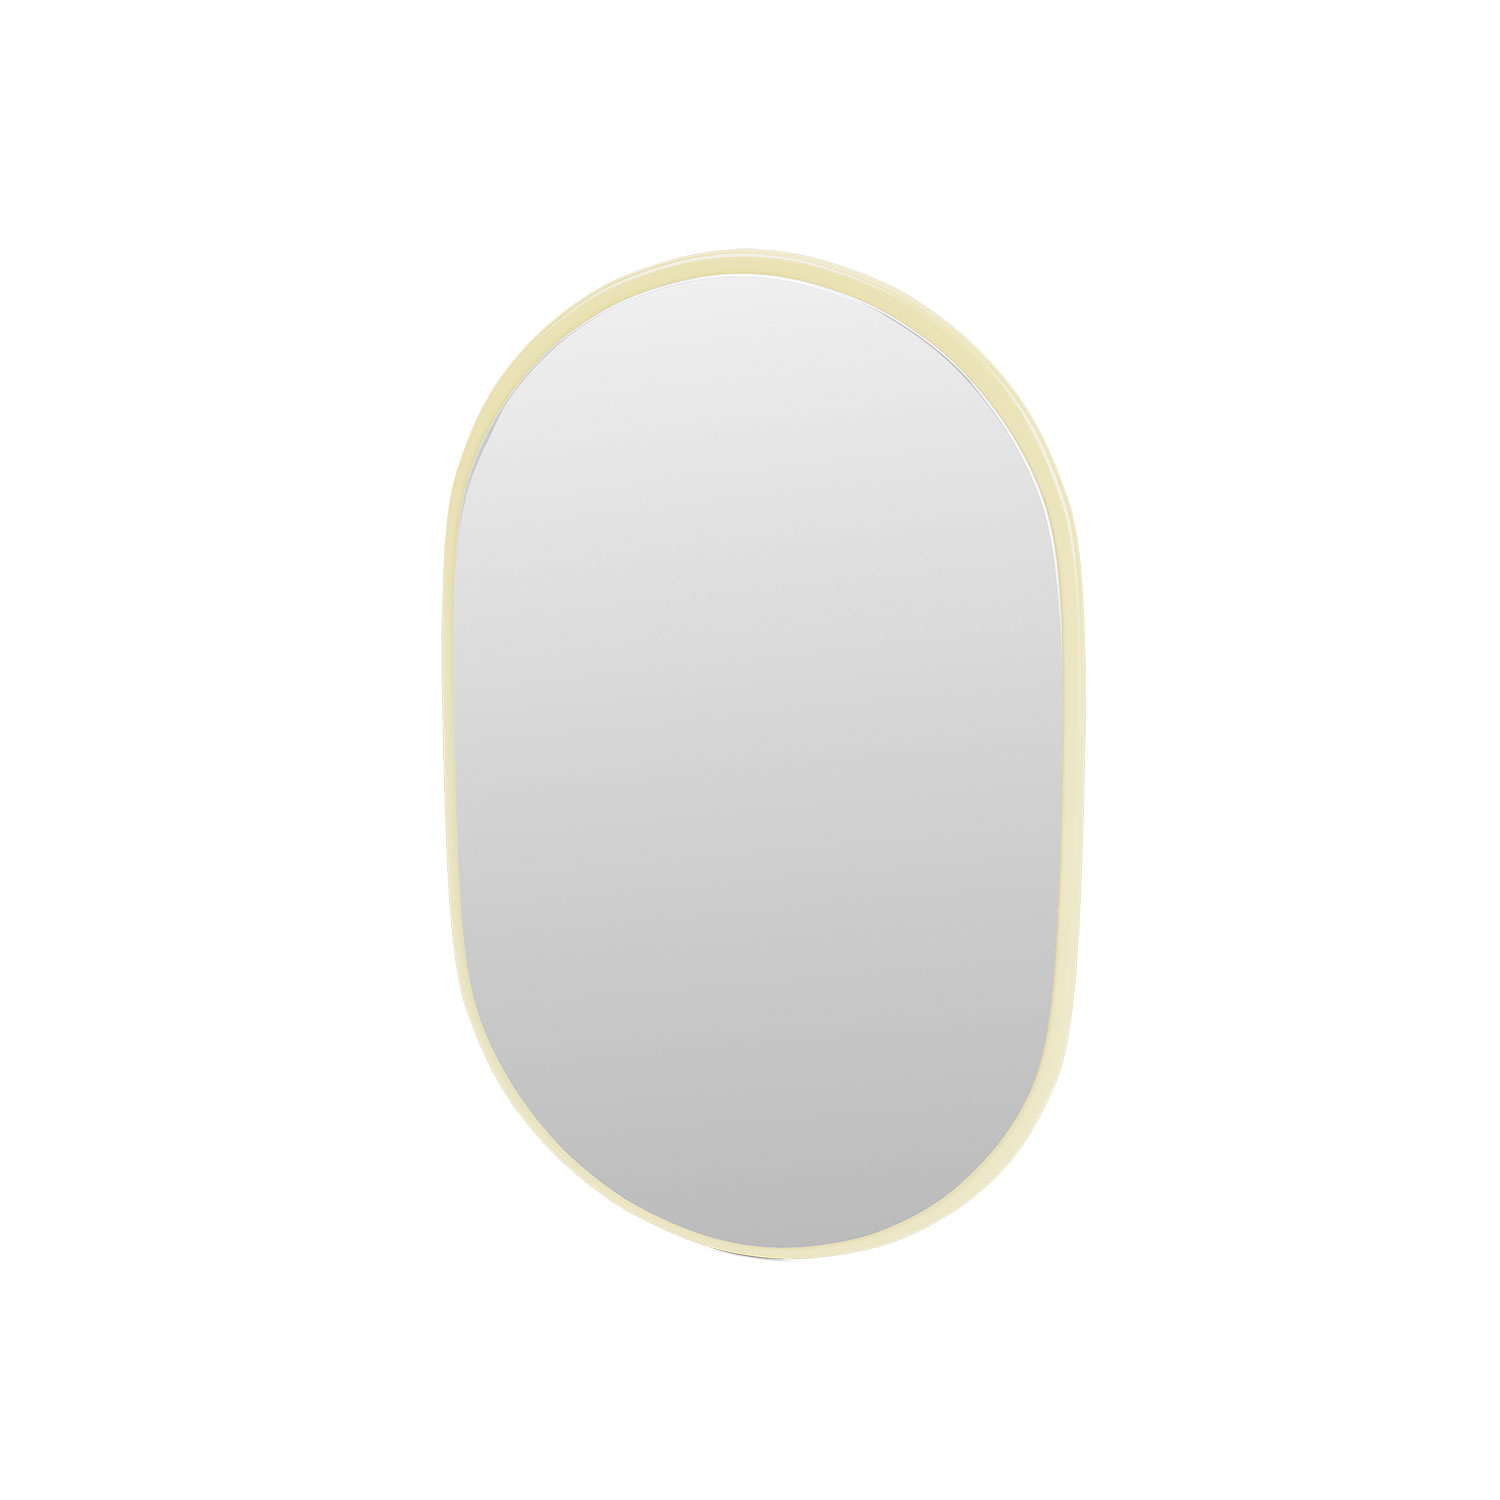 LOOK oval mirror, Camomile